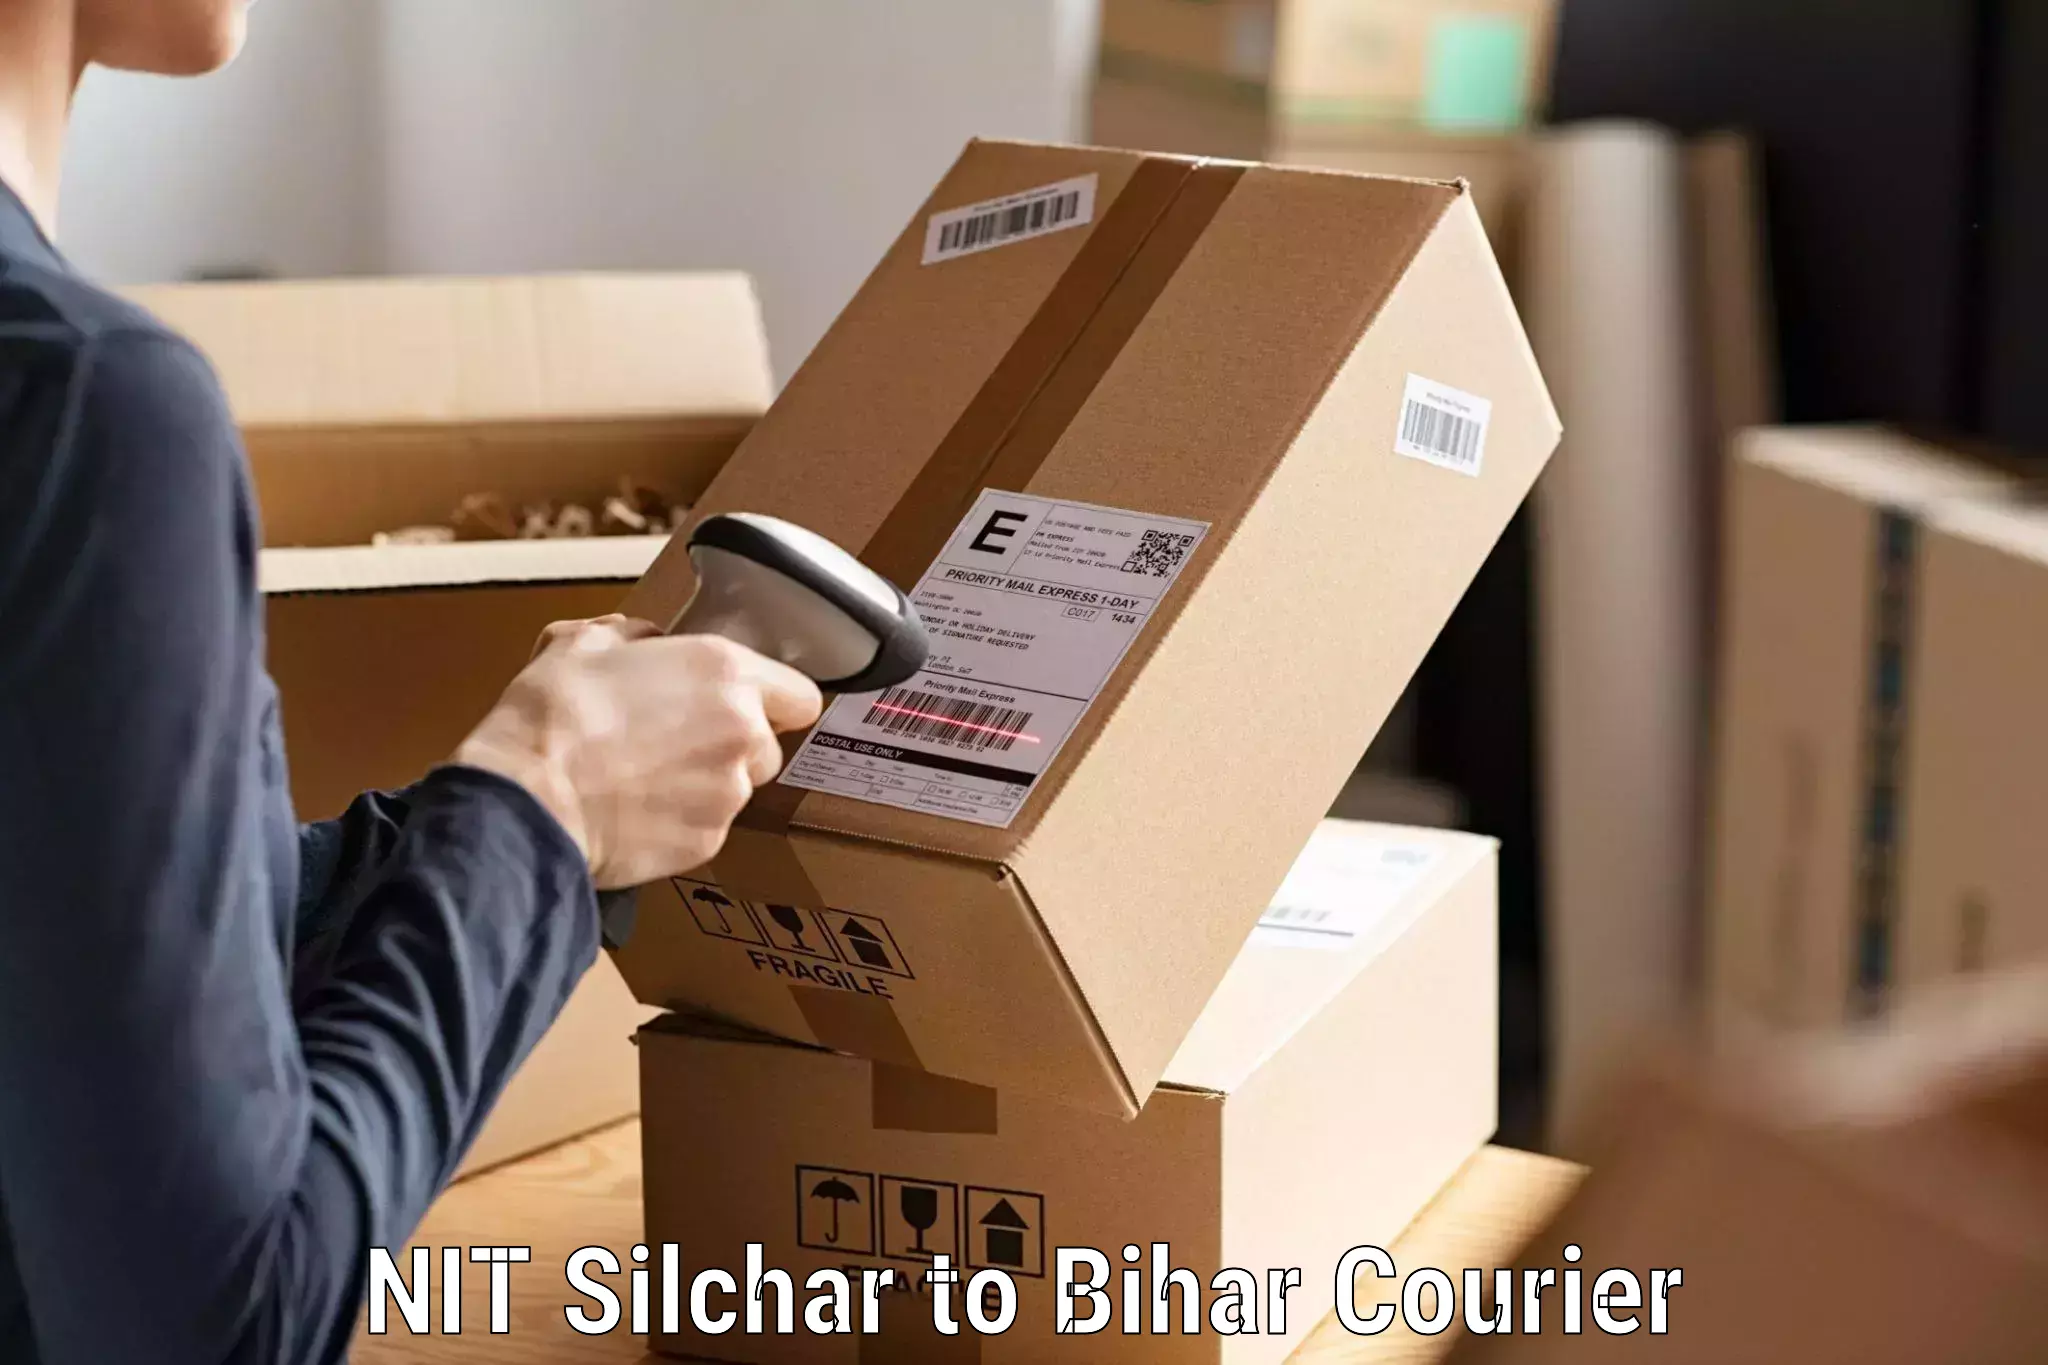 Express logistics providers in NIT Silchar to Bihar